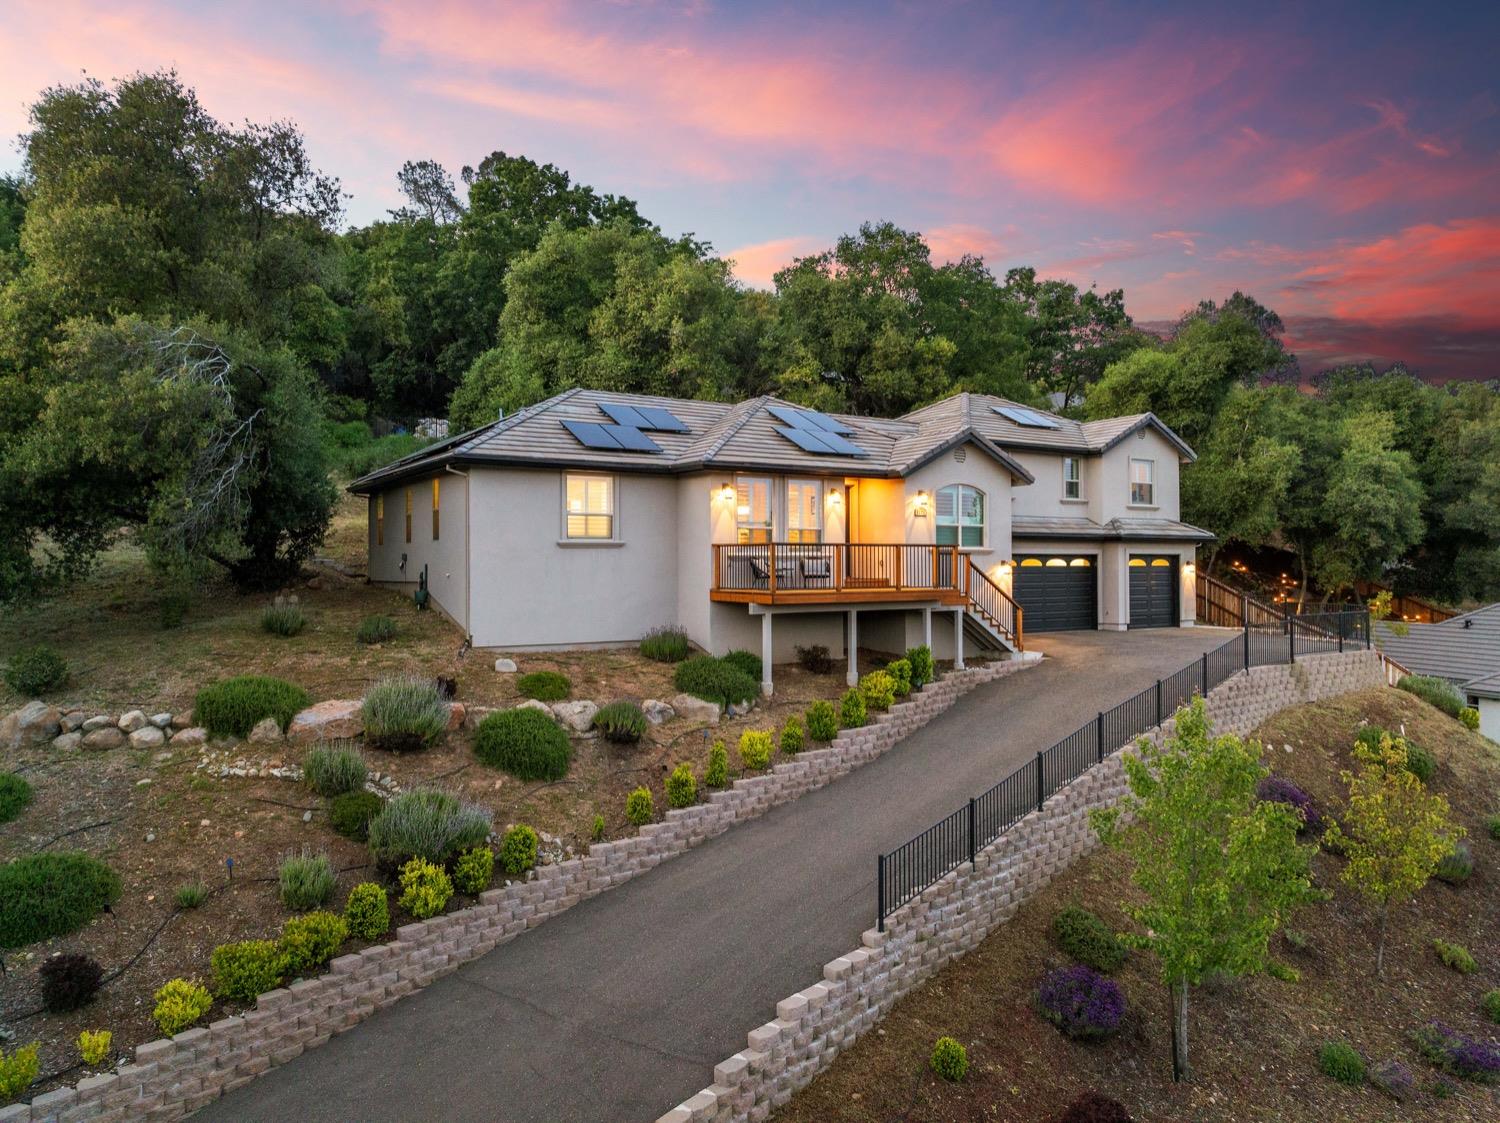 Photo of 1471 Brendan Wy in Placerville, CA